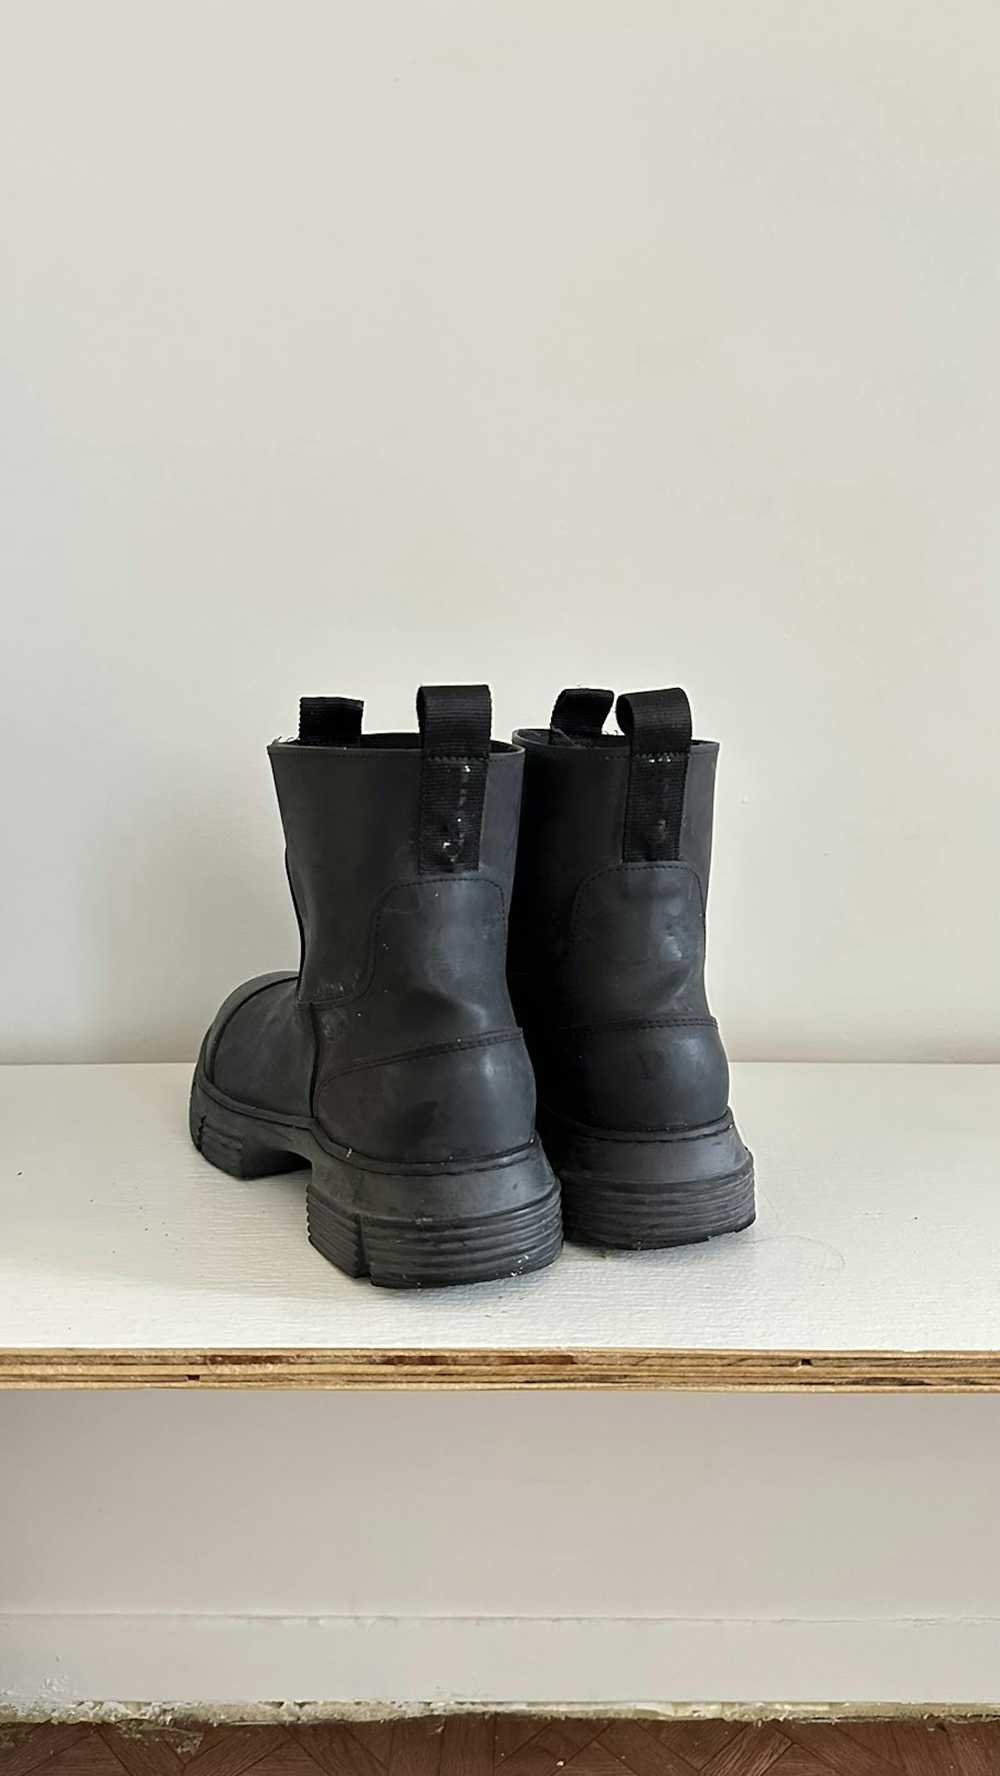 Ganni Ganni Recycled Rubber City Ankle Boots - image 2